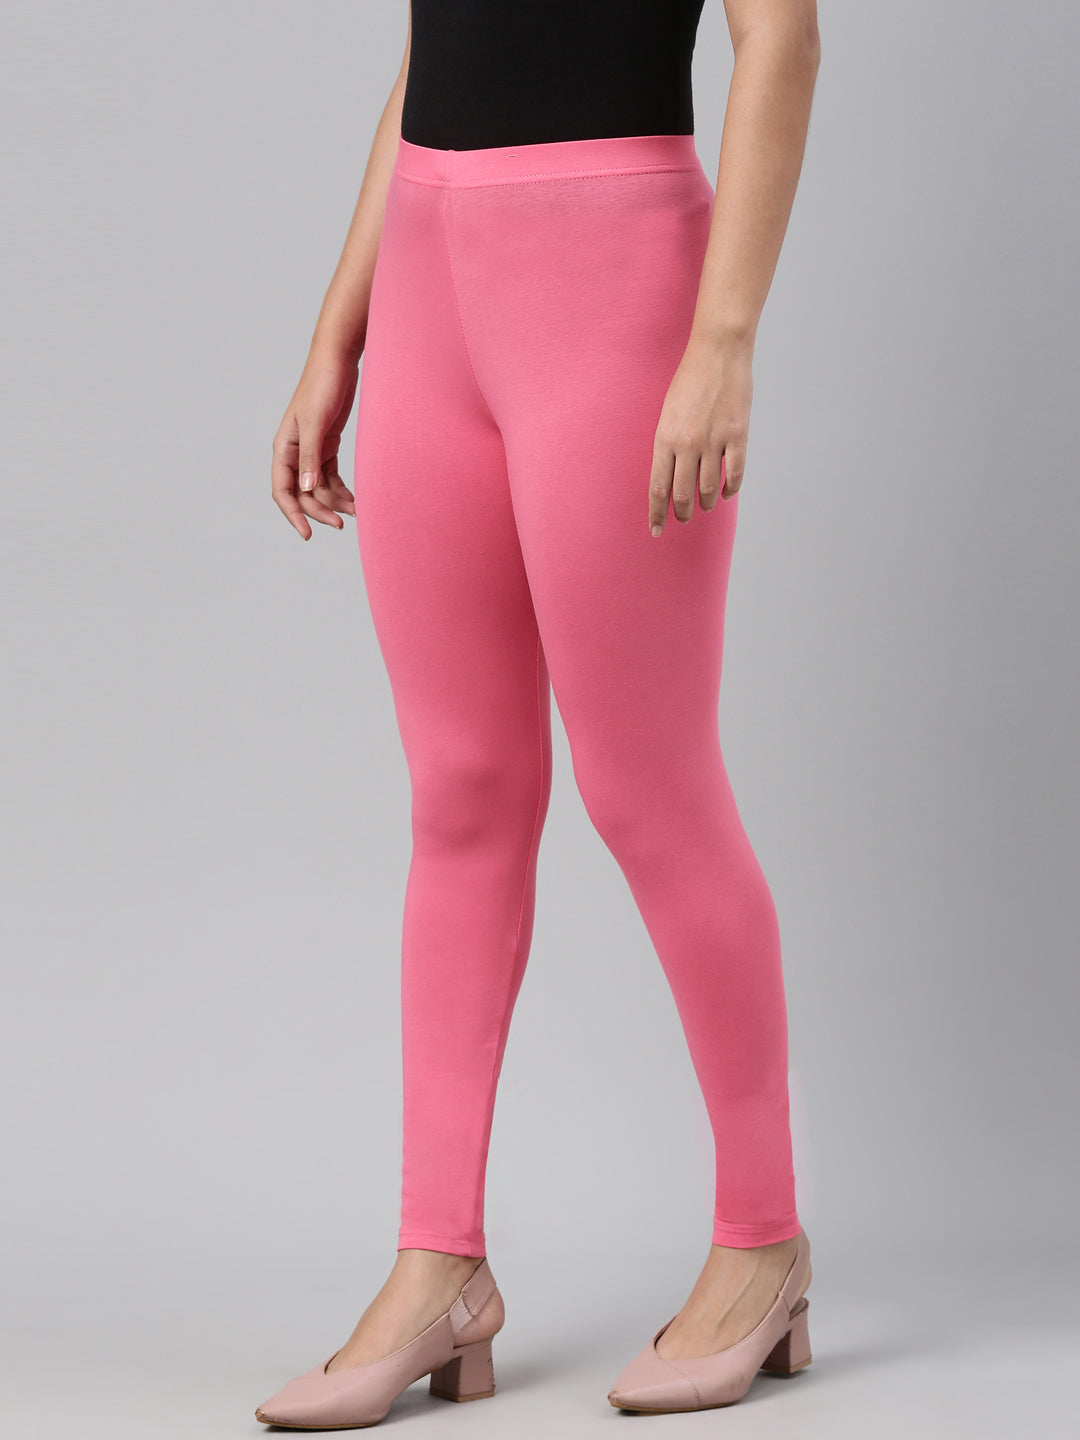 Ankle-Length Essential Stretch Legging | Fullbeauty Outlet